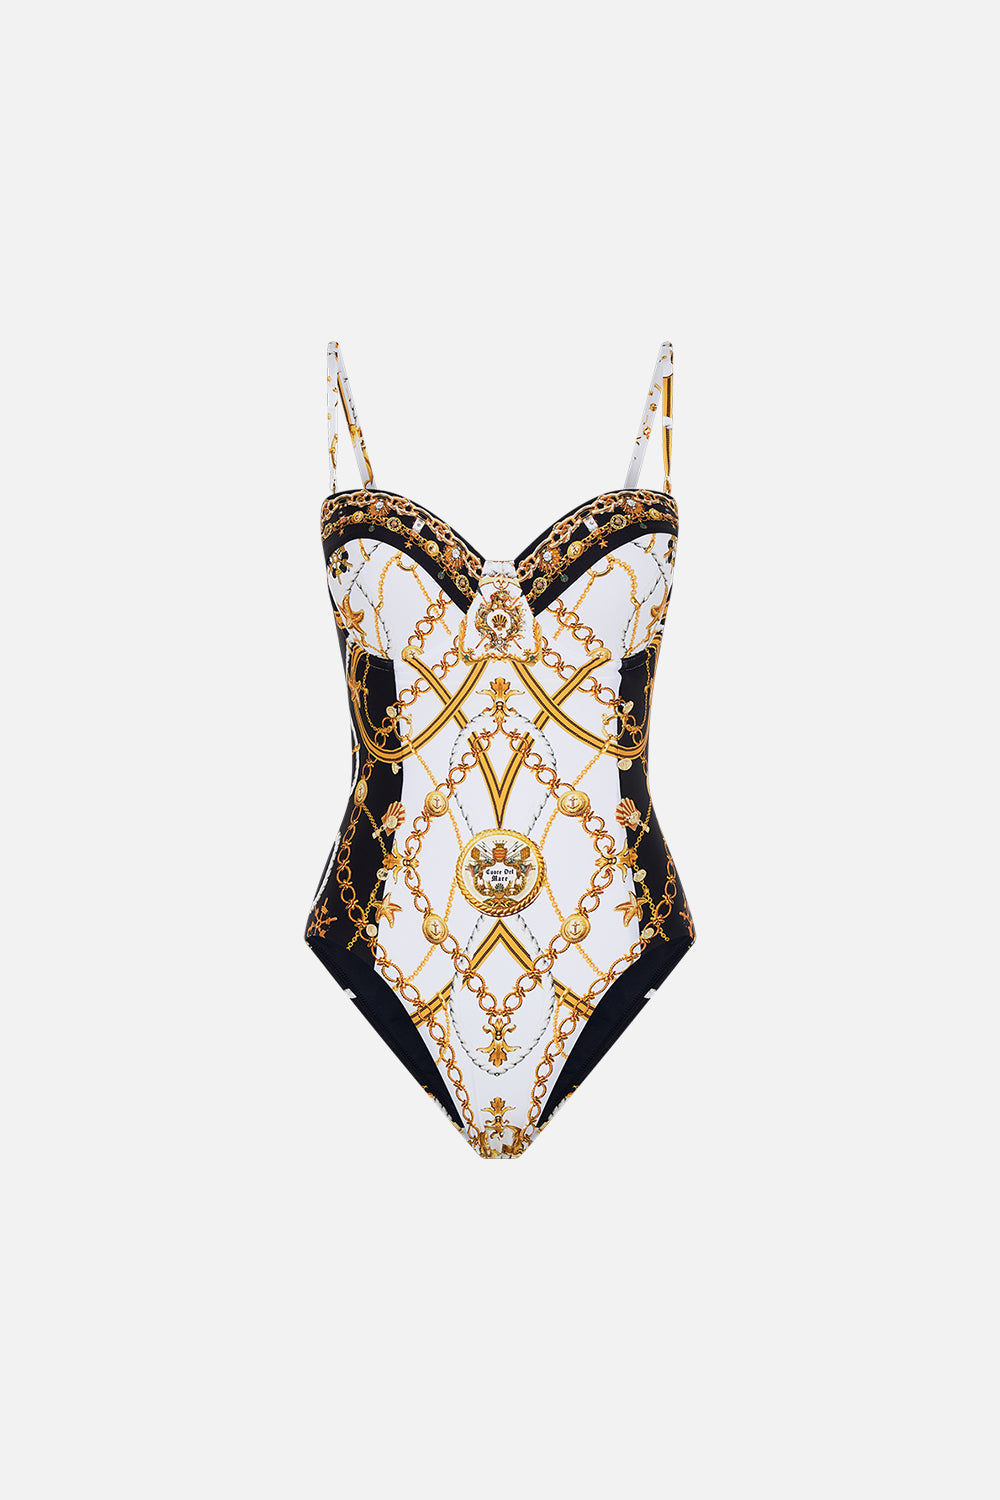 Product view of  CAMILLA underwire one piece in Coast to Coast print